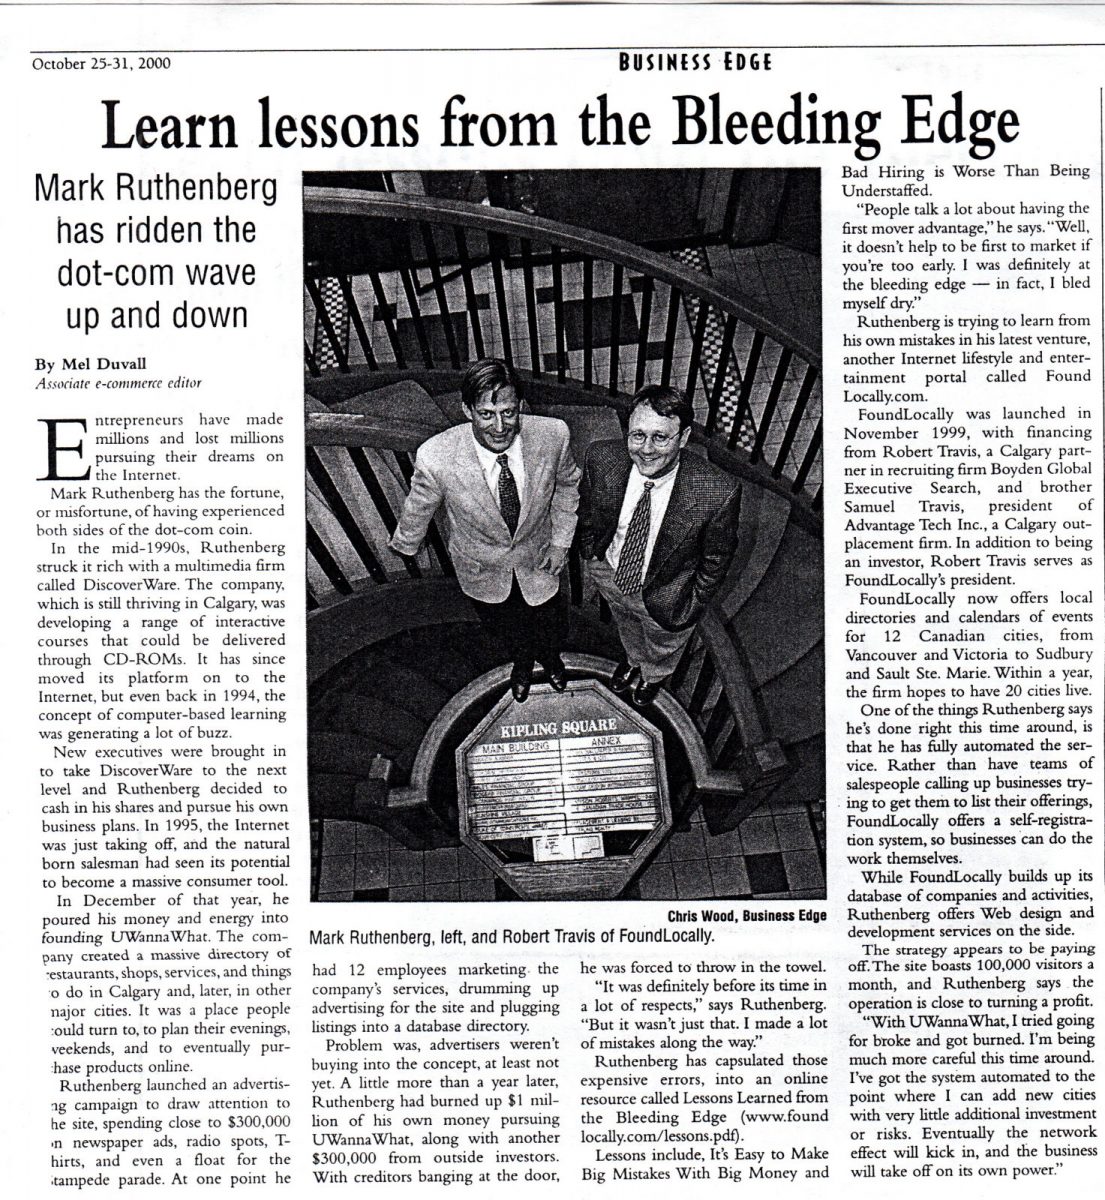 Learn Lessons from the Bleeding Edge - Business Edge